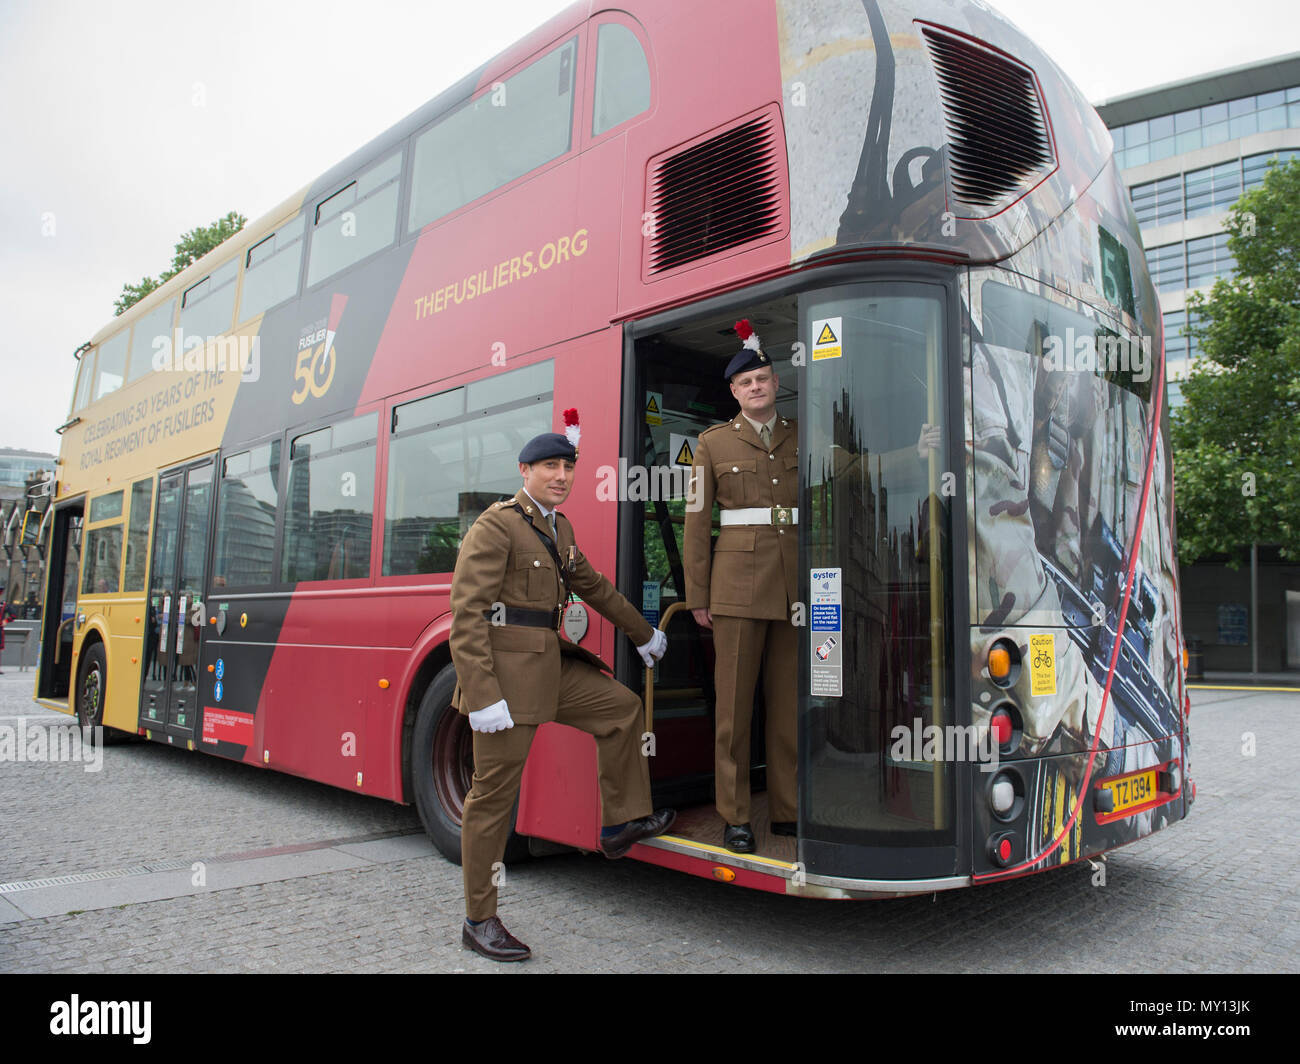 Tower of London, UK. 5 June, 2018. To mark the special occasion of  the Royal Regiment of Fusiliers 50th anniversary a new double decker Routemaster bus has been wrapped in the Regimental colours of rose and primrose on a striking black background and features the Fusilier 50 logo. The initiative is a joint partnership between the Royal Regiment of Fusiliers, Go-Ahead London, Exterion Media and Historic Royal Palaces, an independent charity who look after The Tower of London. Credit: Malcolm Park editorial/Alamy Live News Stock Photo